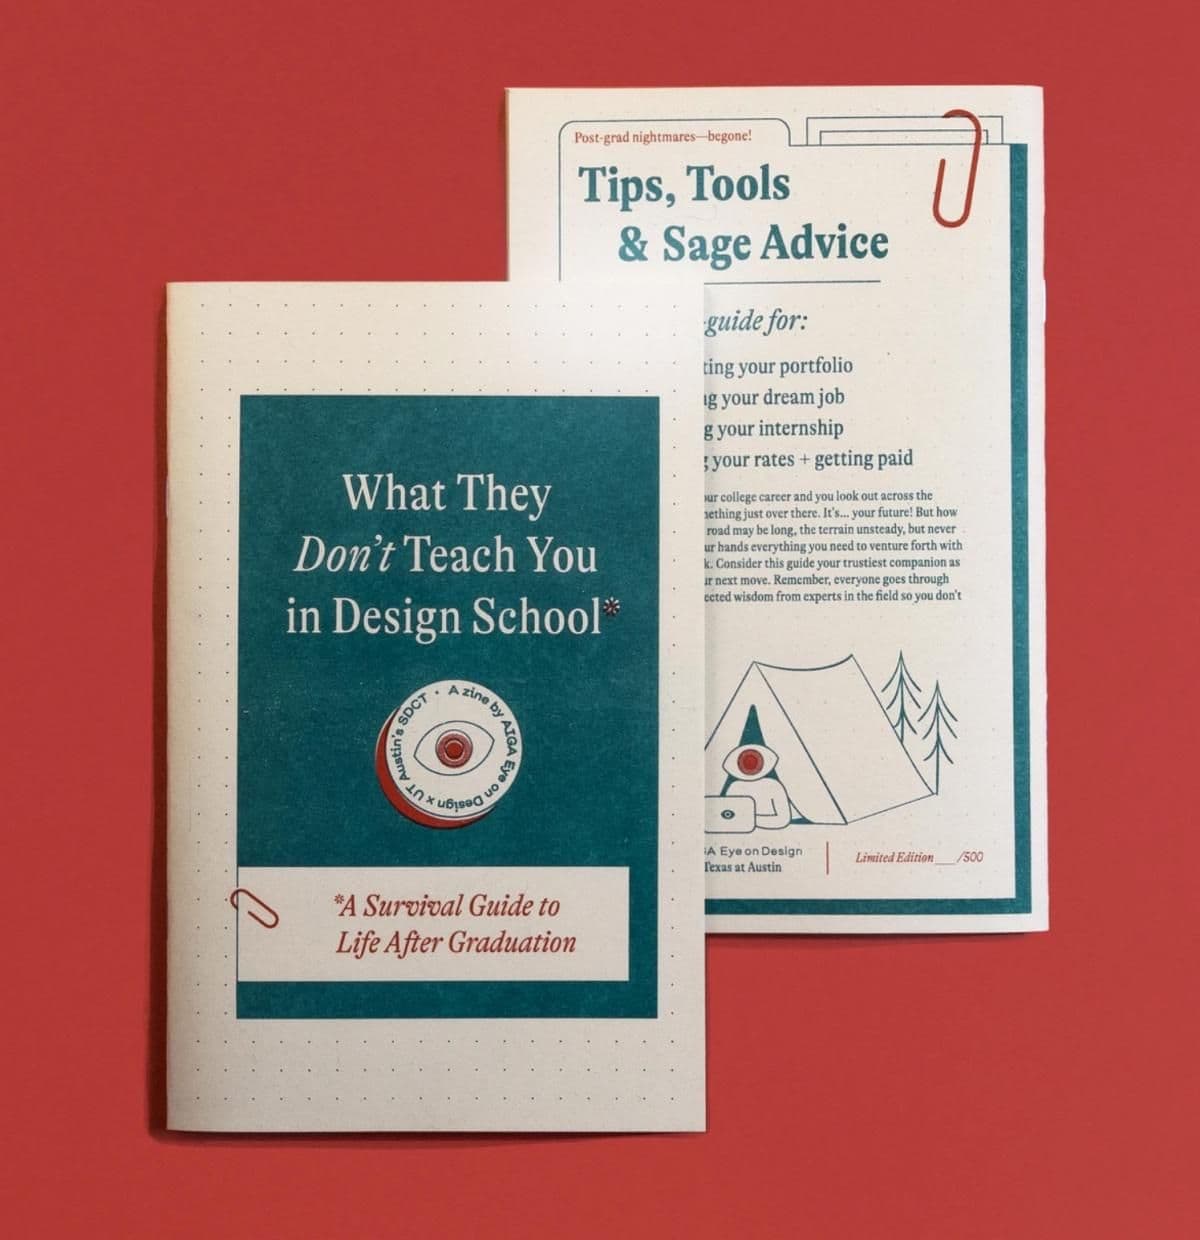 Pages from a zine with career advice for designers